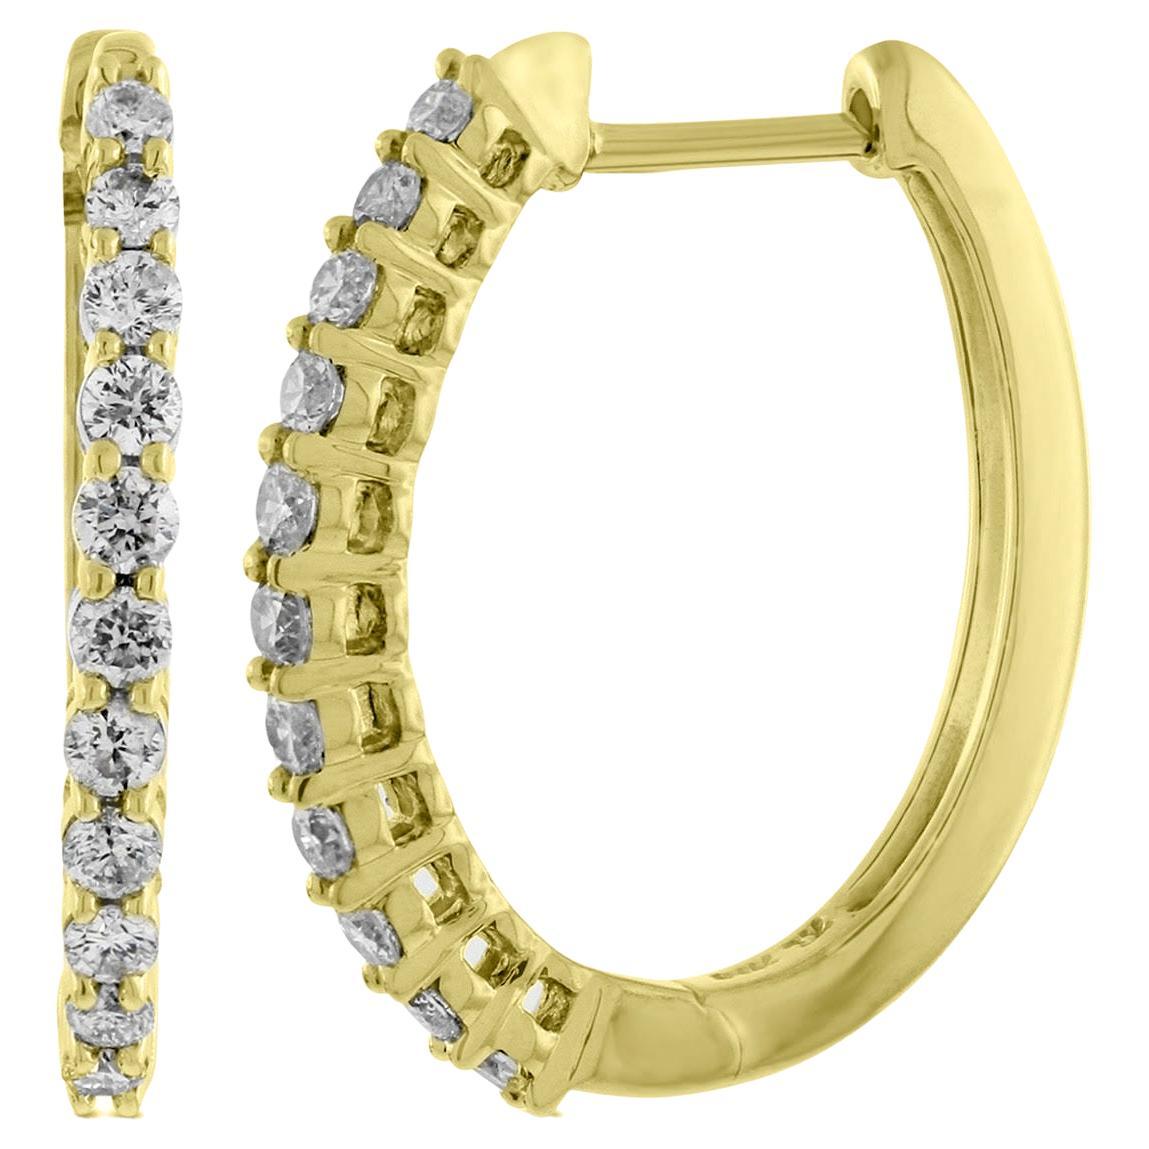 .50 Carat Total Weight Diamond Outside Round Hoop Earrings in 14K Yellow Gold